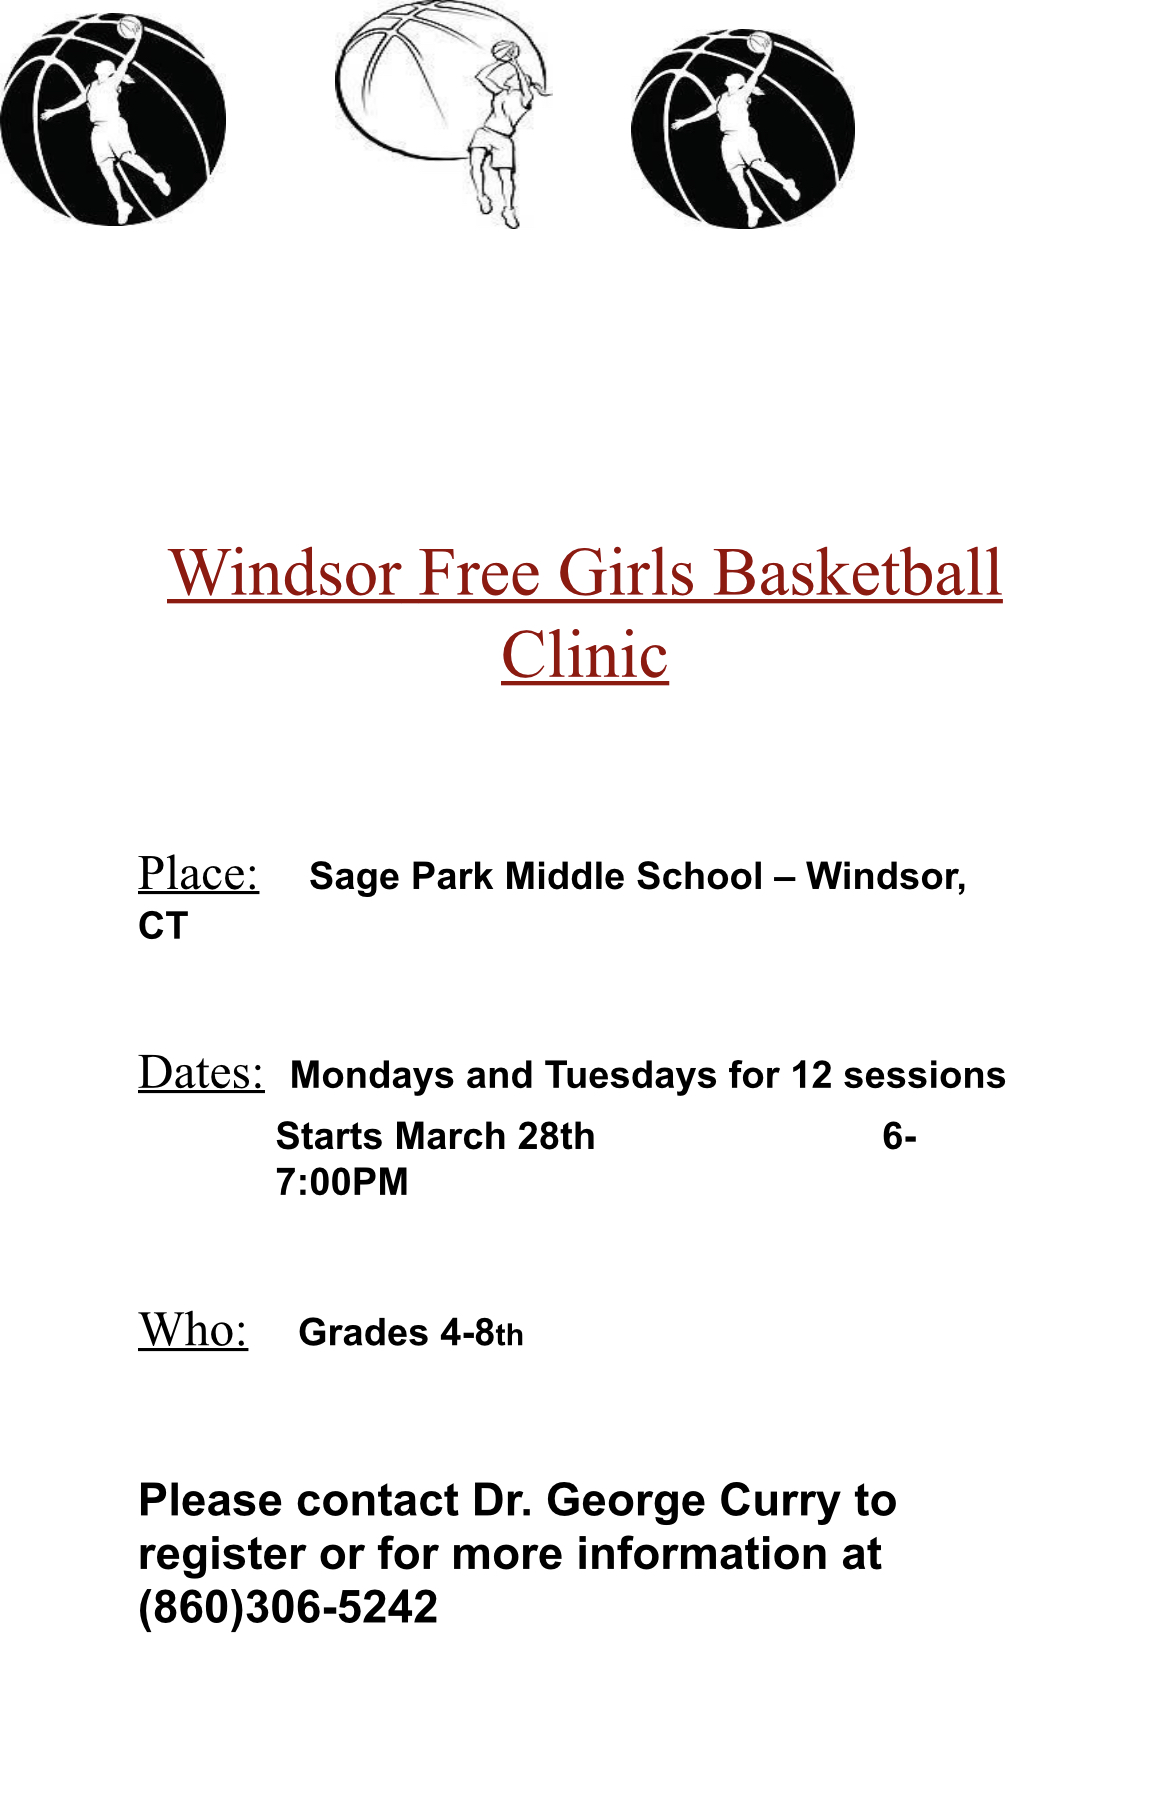 Free Windsor Girls Basketball Clinic (12 Sessions starting 3.28) 